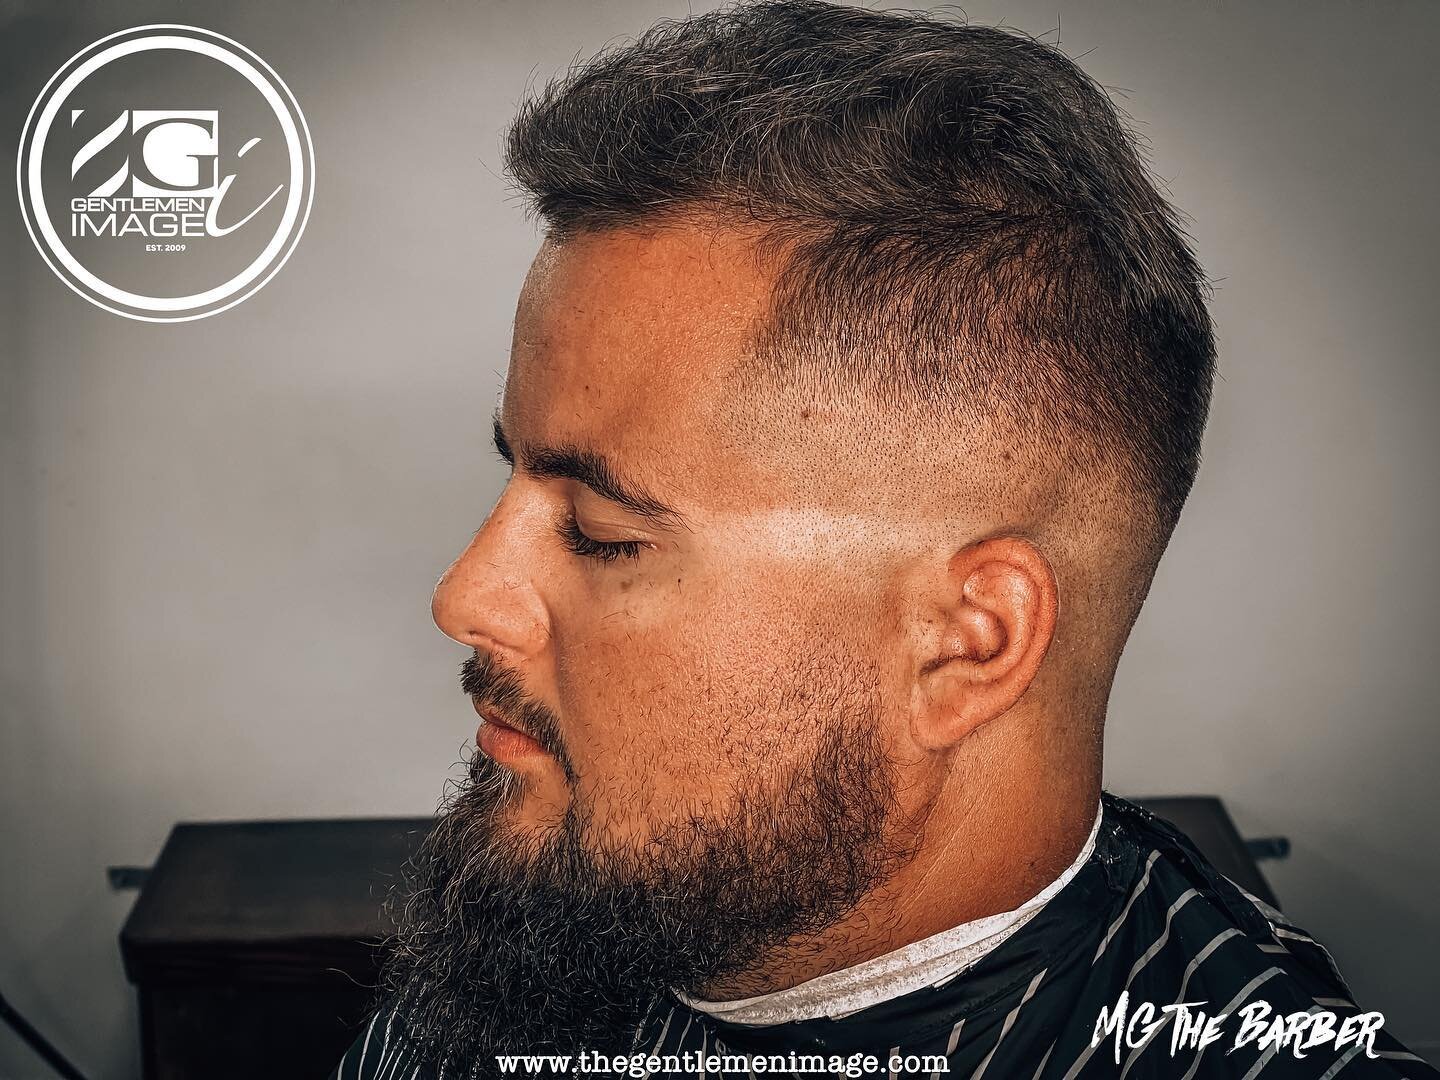 SHE LIKES A GENTLEMAN WHO
KNOWS WHEN NOT TO BE GENTLE.

Service: Gentlemen Image Cut 

  Shop Now-Book Now
www.thegentlemenimage.com

#Godfirst #family #Godsplan #GiStayFly #GUnit #MGTheBarber #menhair #menskin #beards #healthyhair #byramms #hottestt